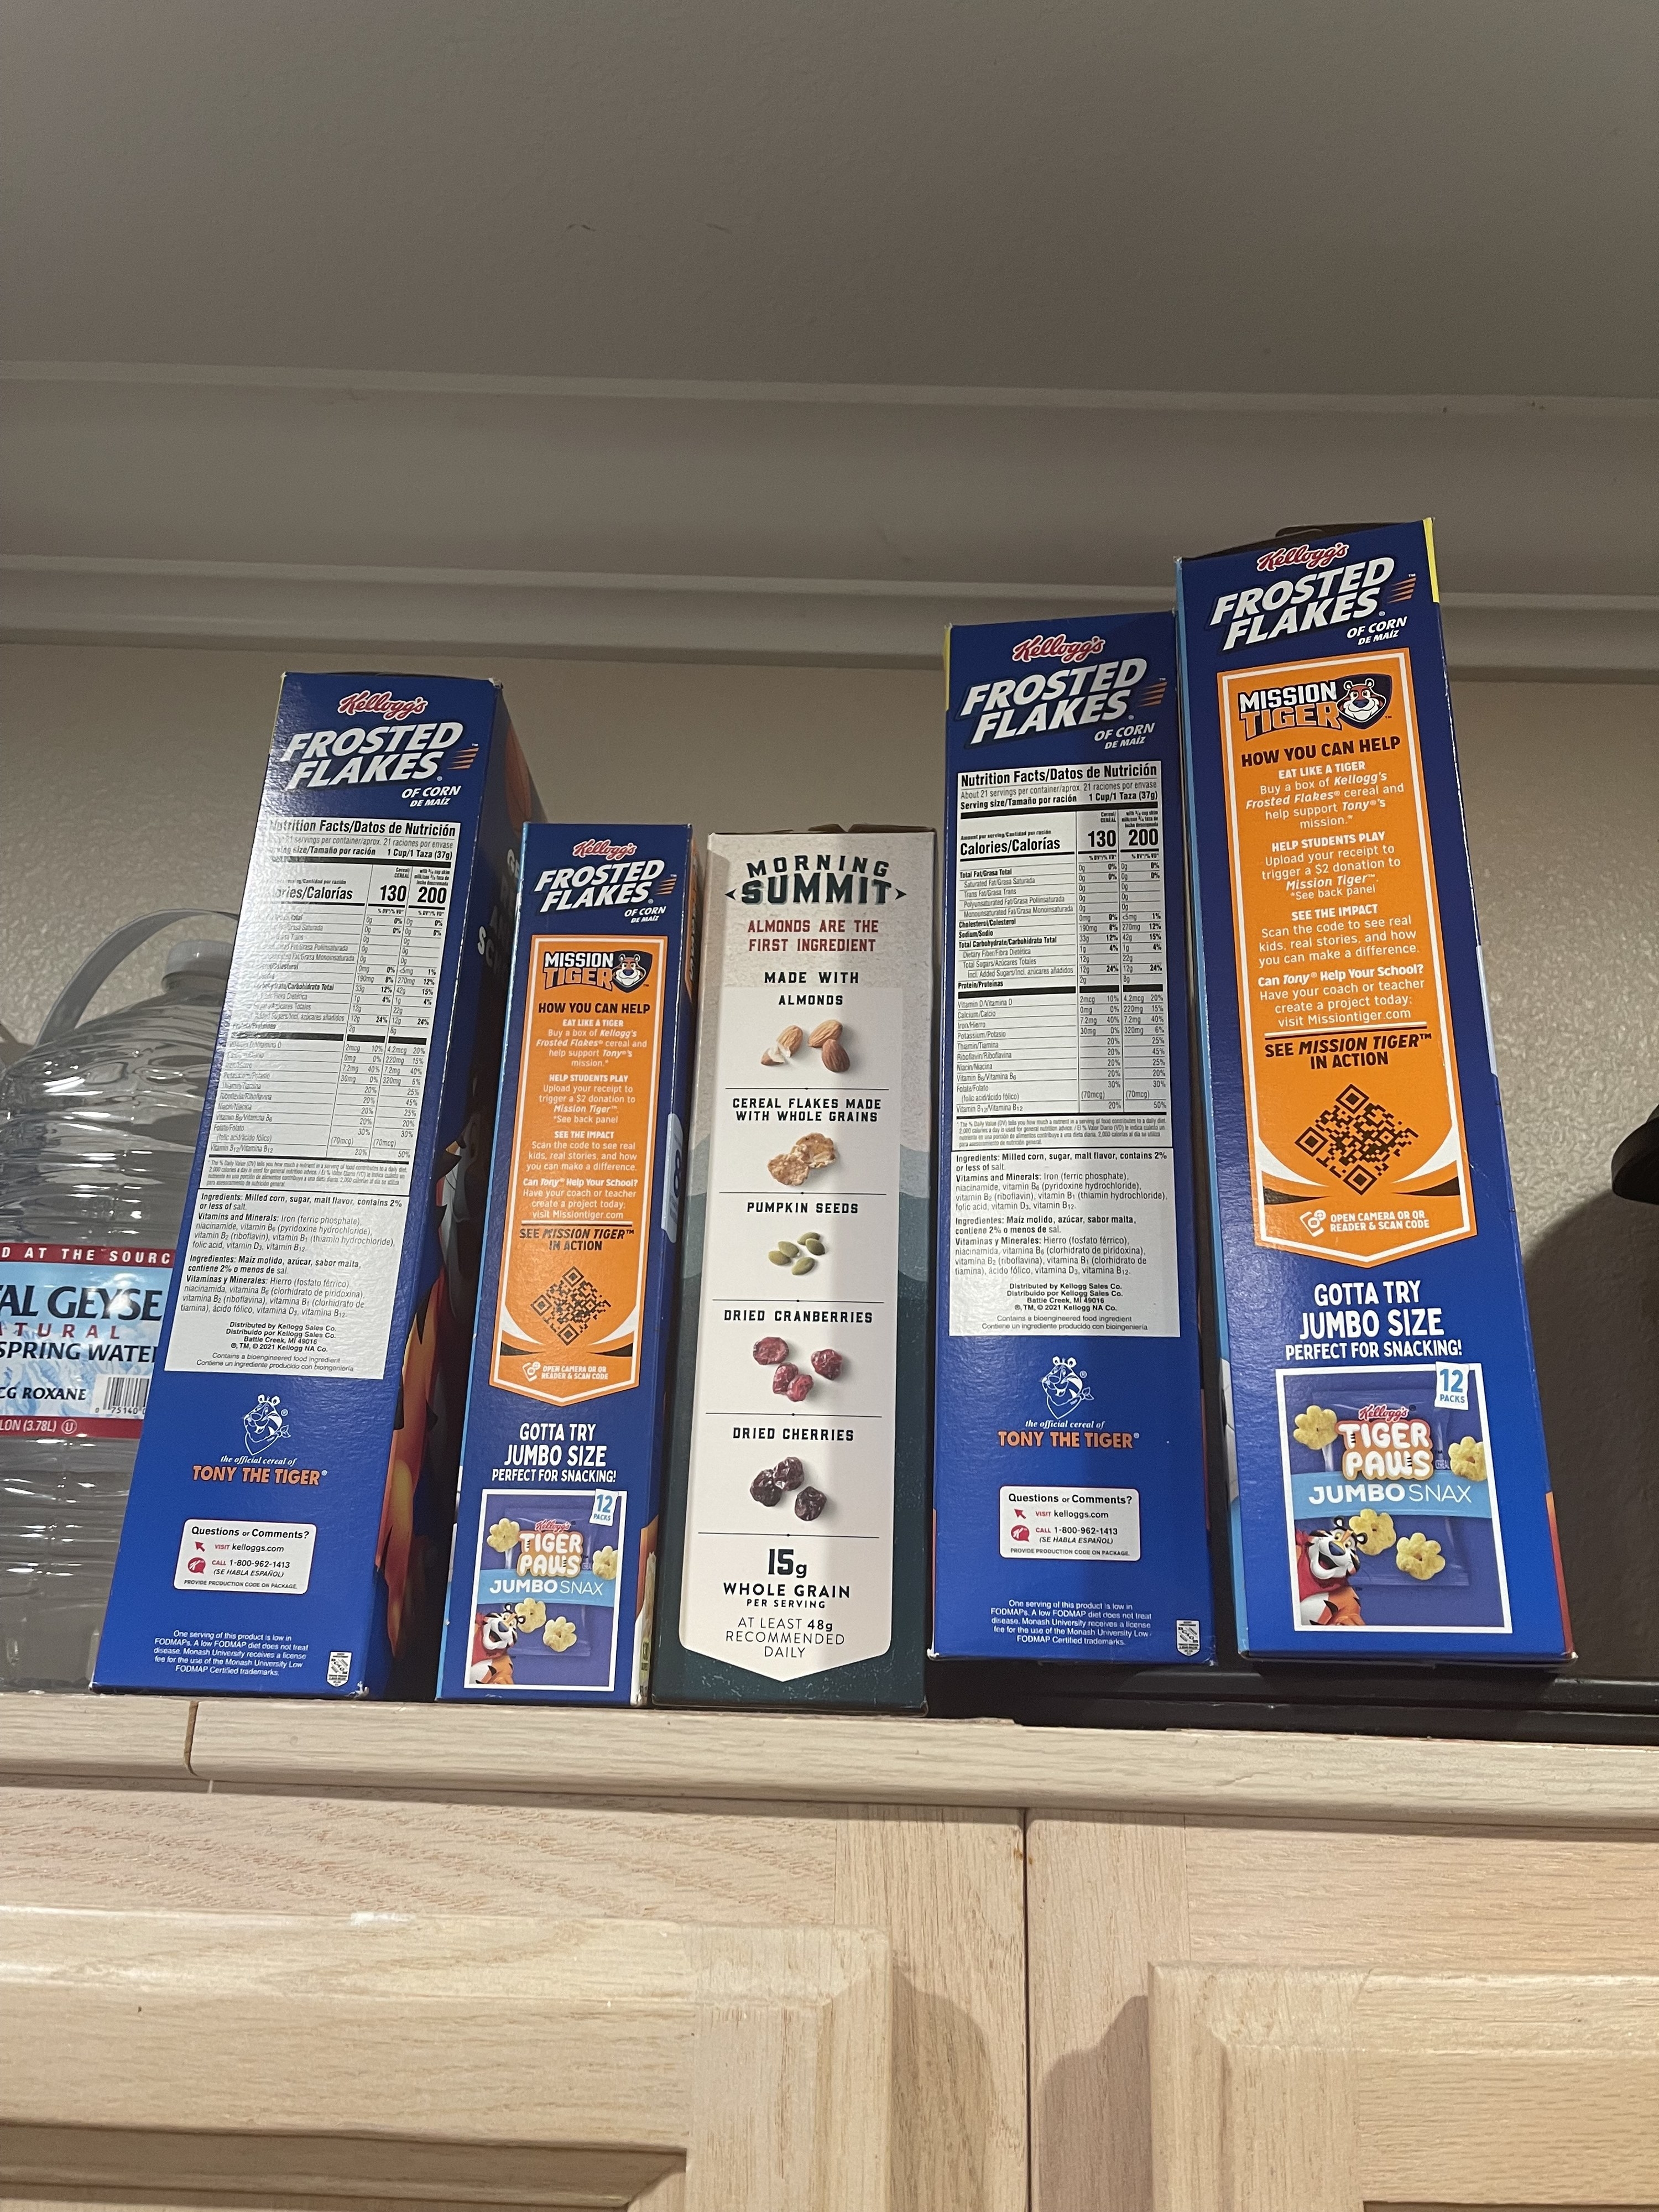 boxes of Frosted Flakes